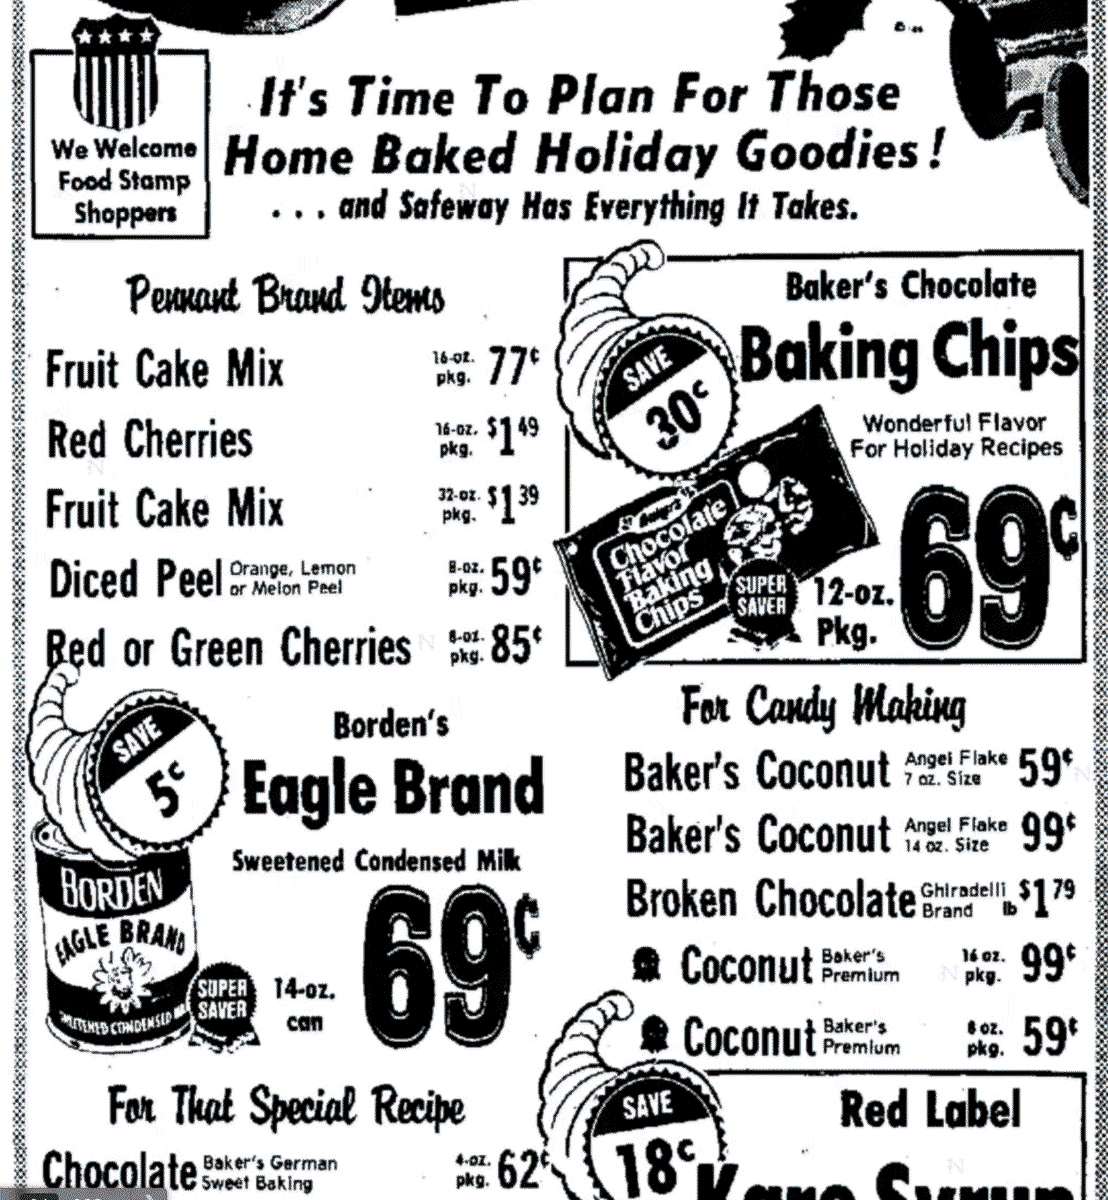 Baker’s 1976 prices: Ads for Baker’s Coconut and Baker’s Chocolate from the Pocatello, Idaho edition of the Idaho State Journal, November 3, 1976.; seventies; Baker’s Coconut; Idaho; Safeway